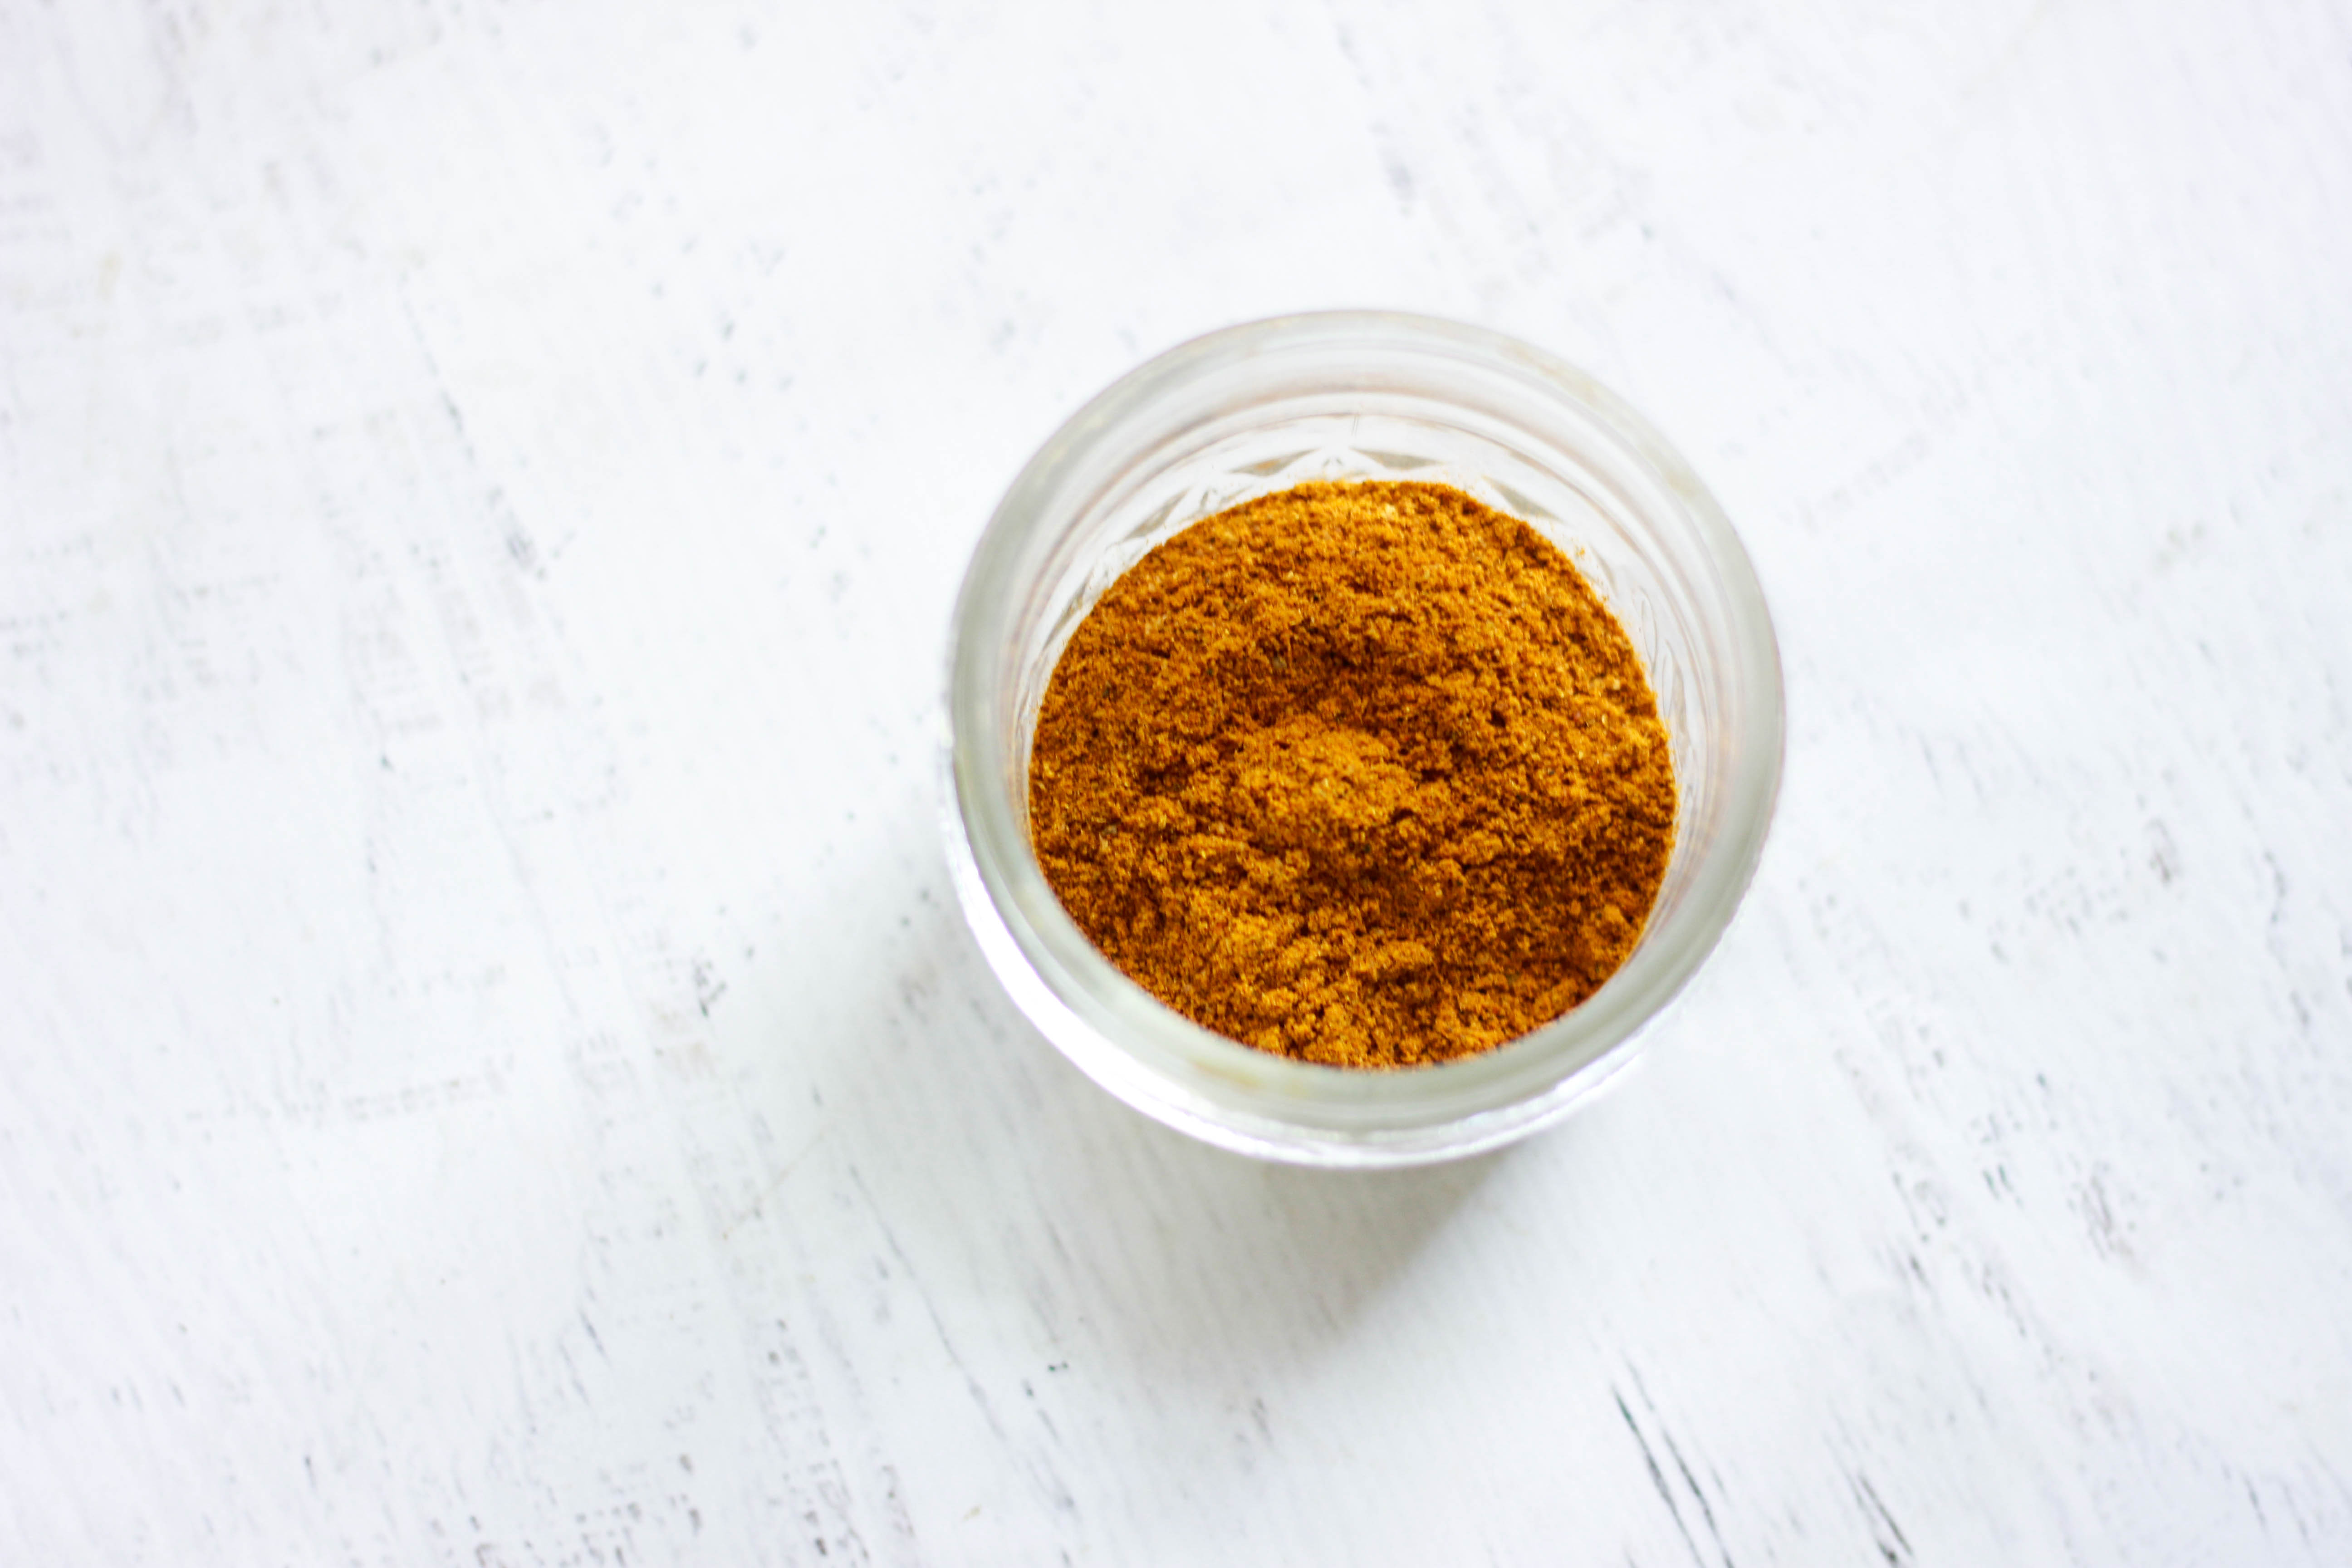 Homemade Curry Powder (Not Spicy)